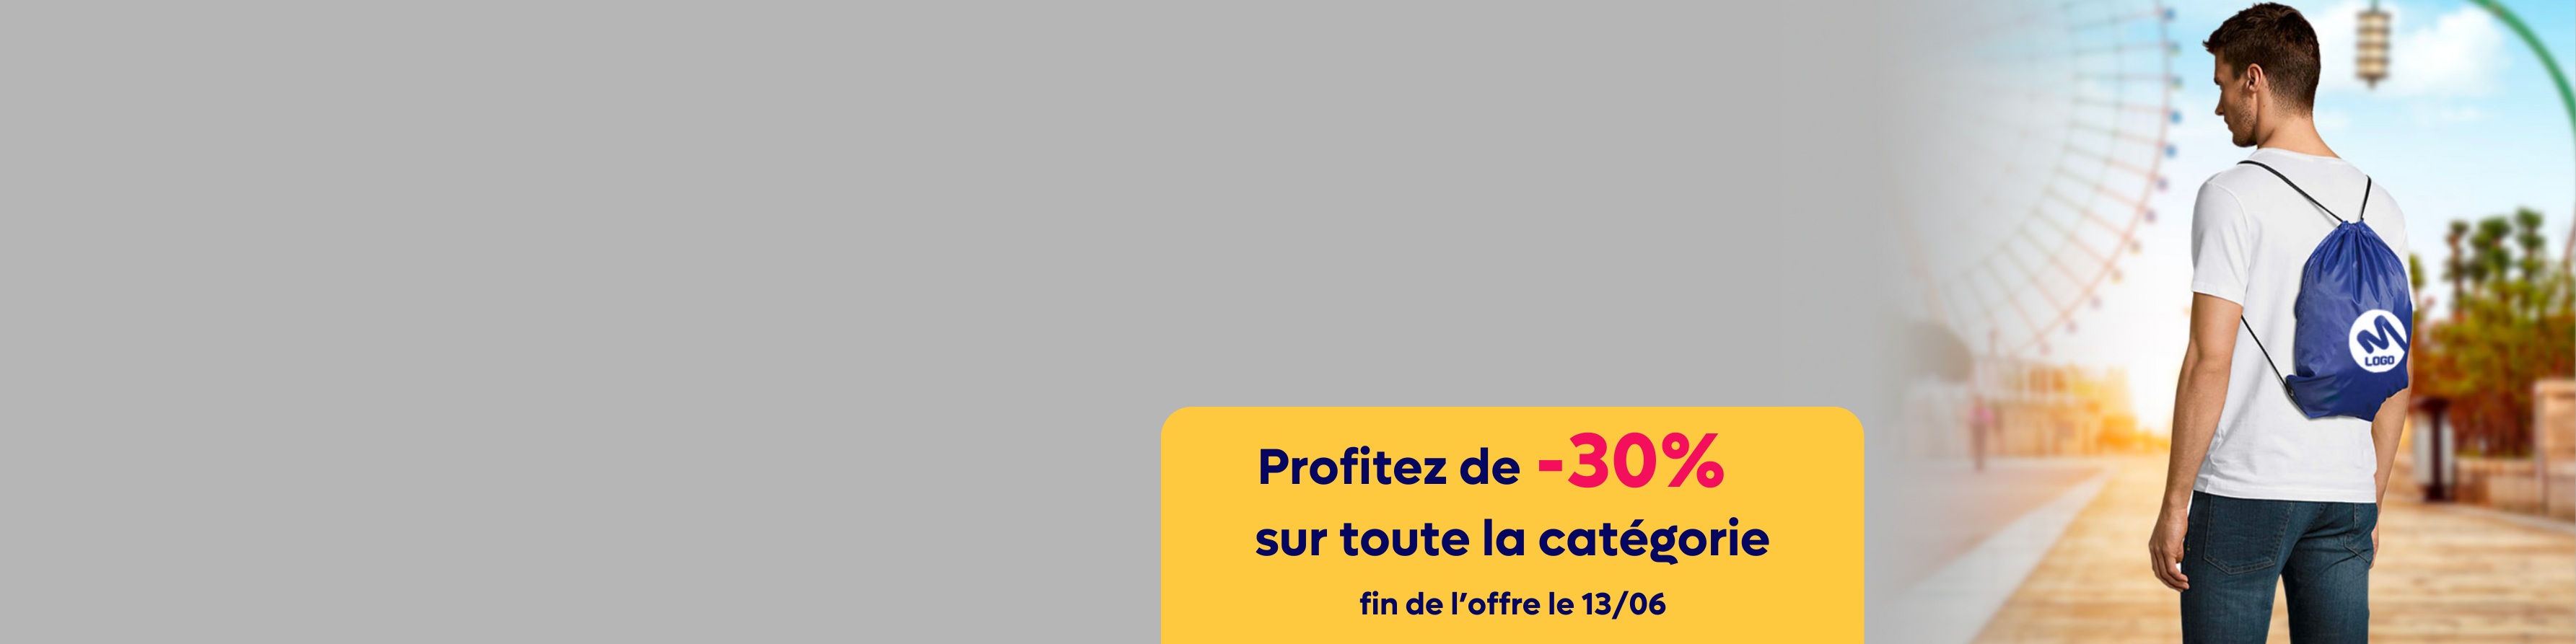 promo sous cat bagagerie 